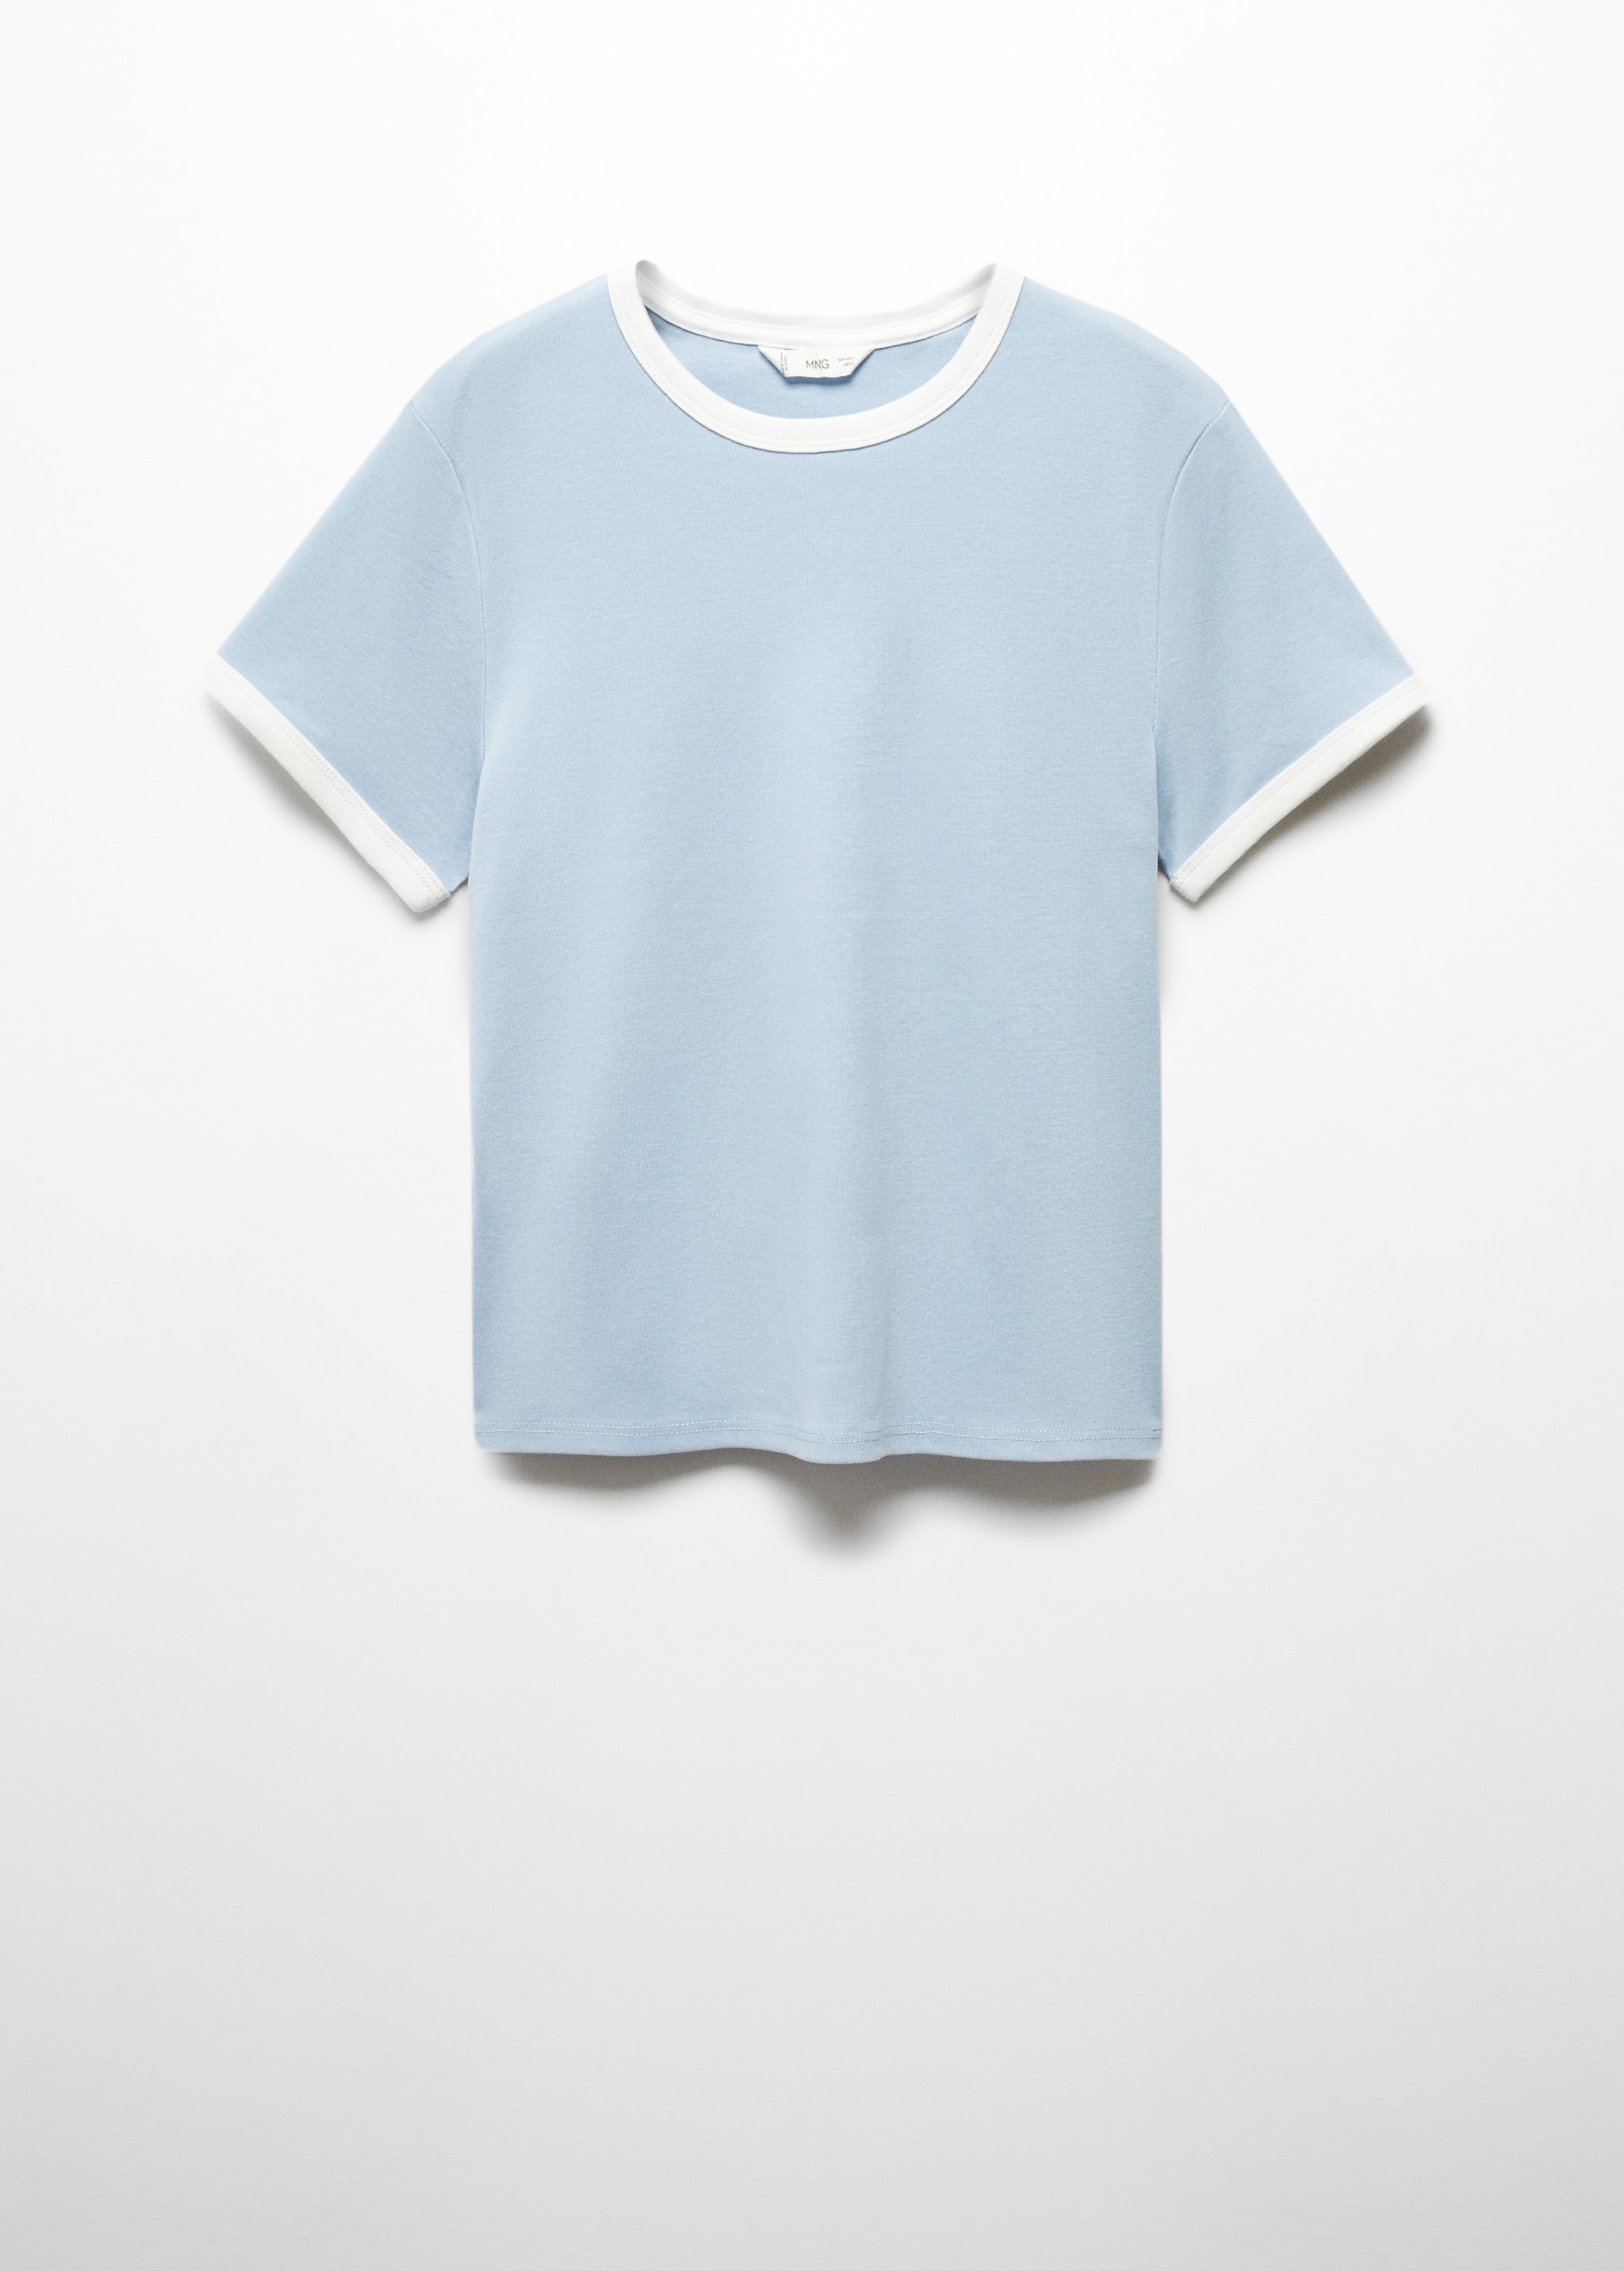 Crop short sleeve t-shirt - Article without model